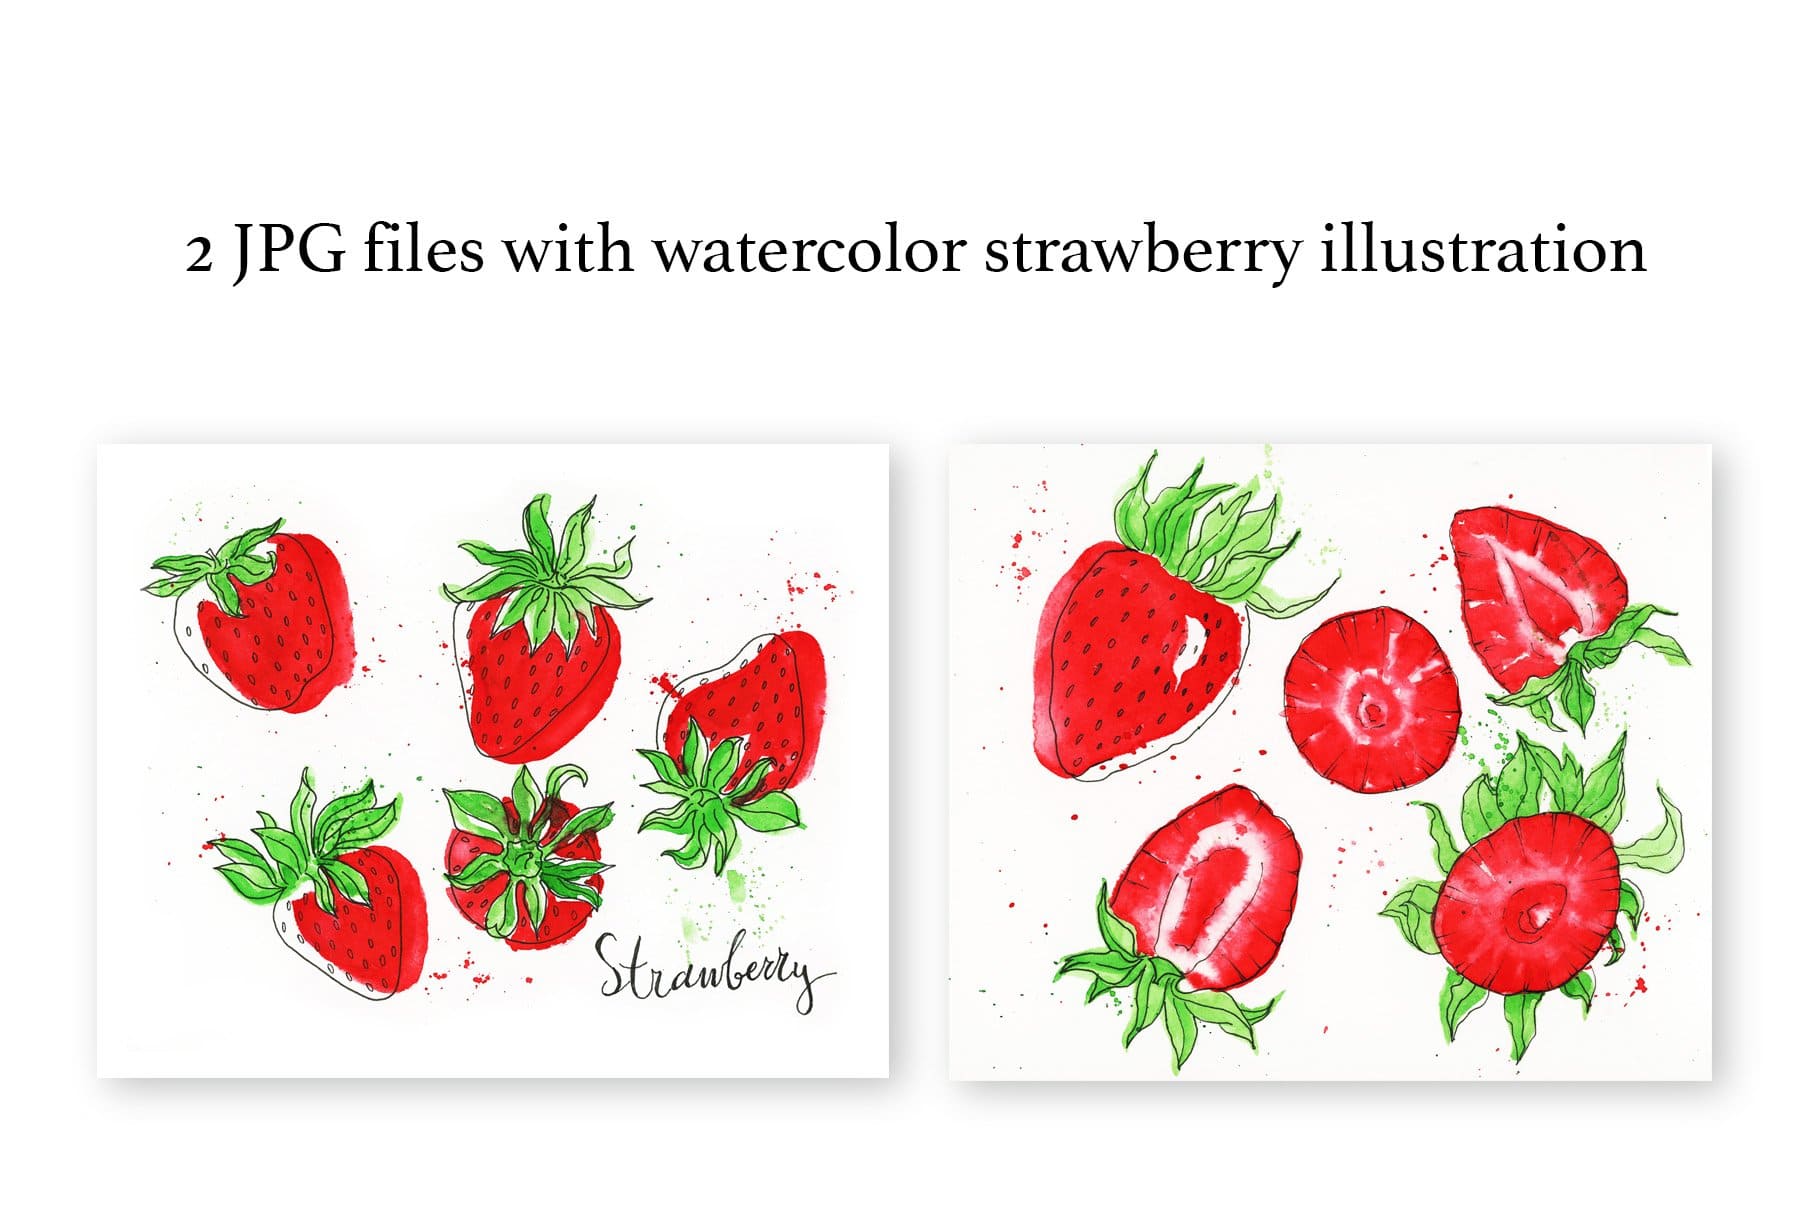 2 JPG files with watercolor strawberry illustration.